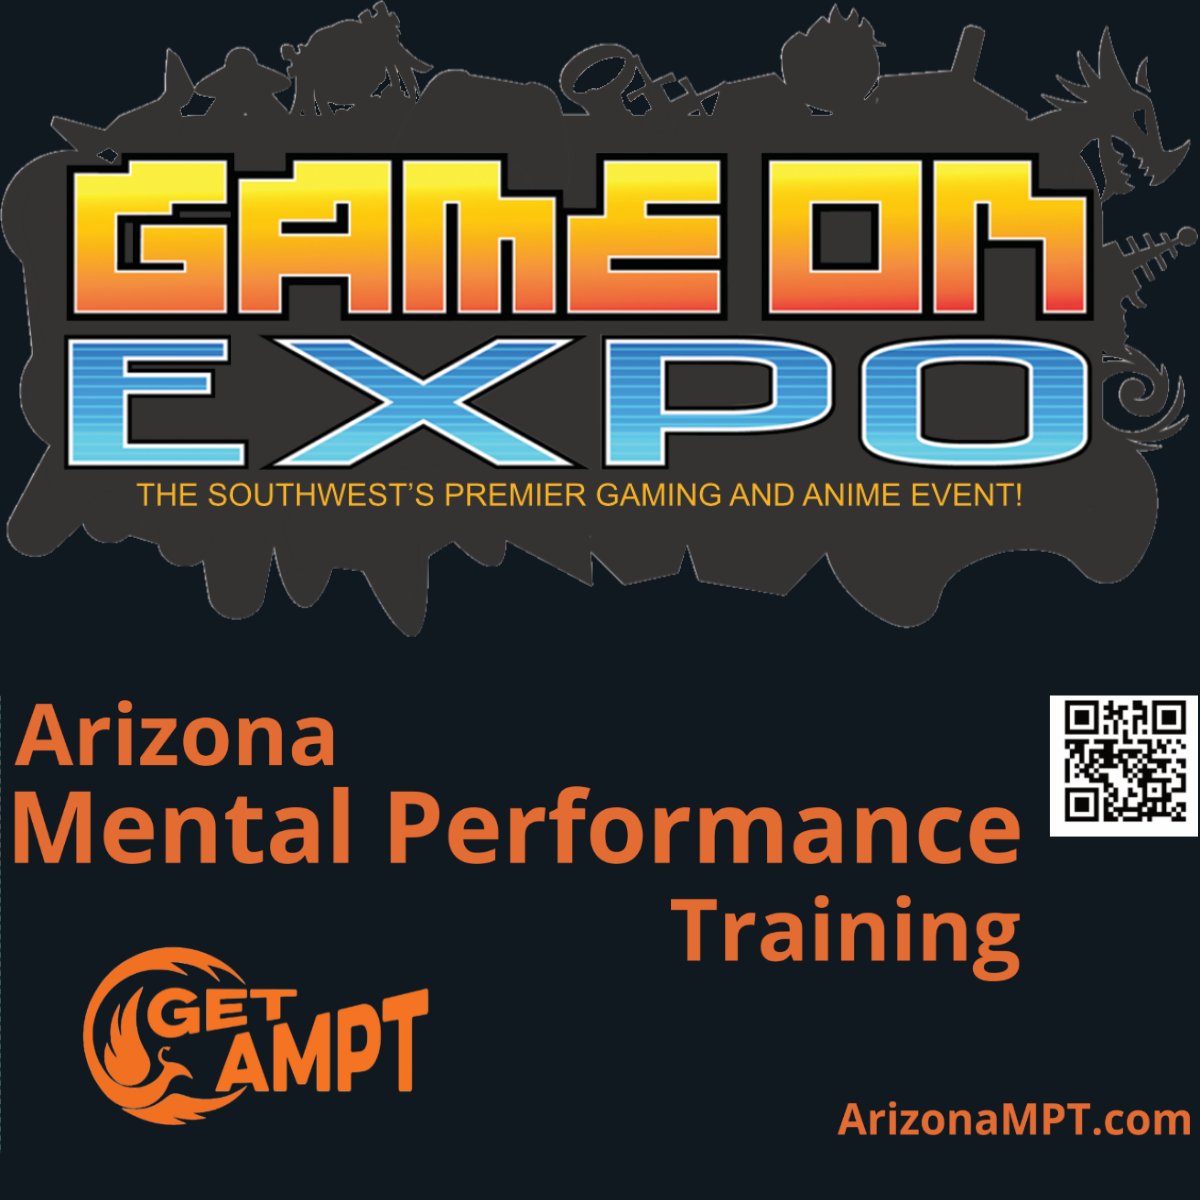 I'm thrilled to announce I will be presenting two engaging discussions on #MentalPerformance at the upcoming @GameOnExpo-August in Phoenix!
#GameOnExpo #GameOnExpo2023
Friday, August 11th, 5:15 pm
Saturday, August 12th, 6:30 pm
#esportsperformance #mentalskills #coaching #esports